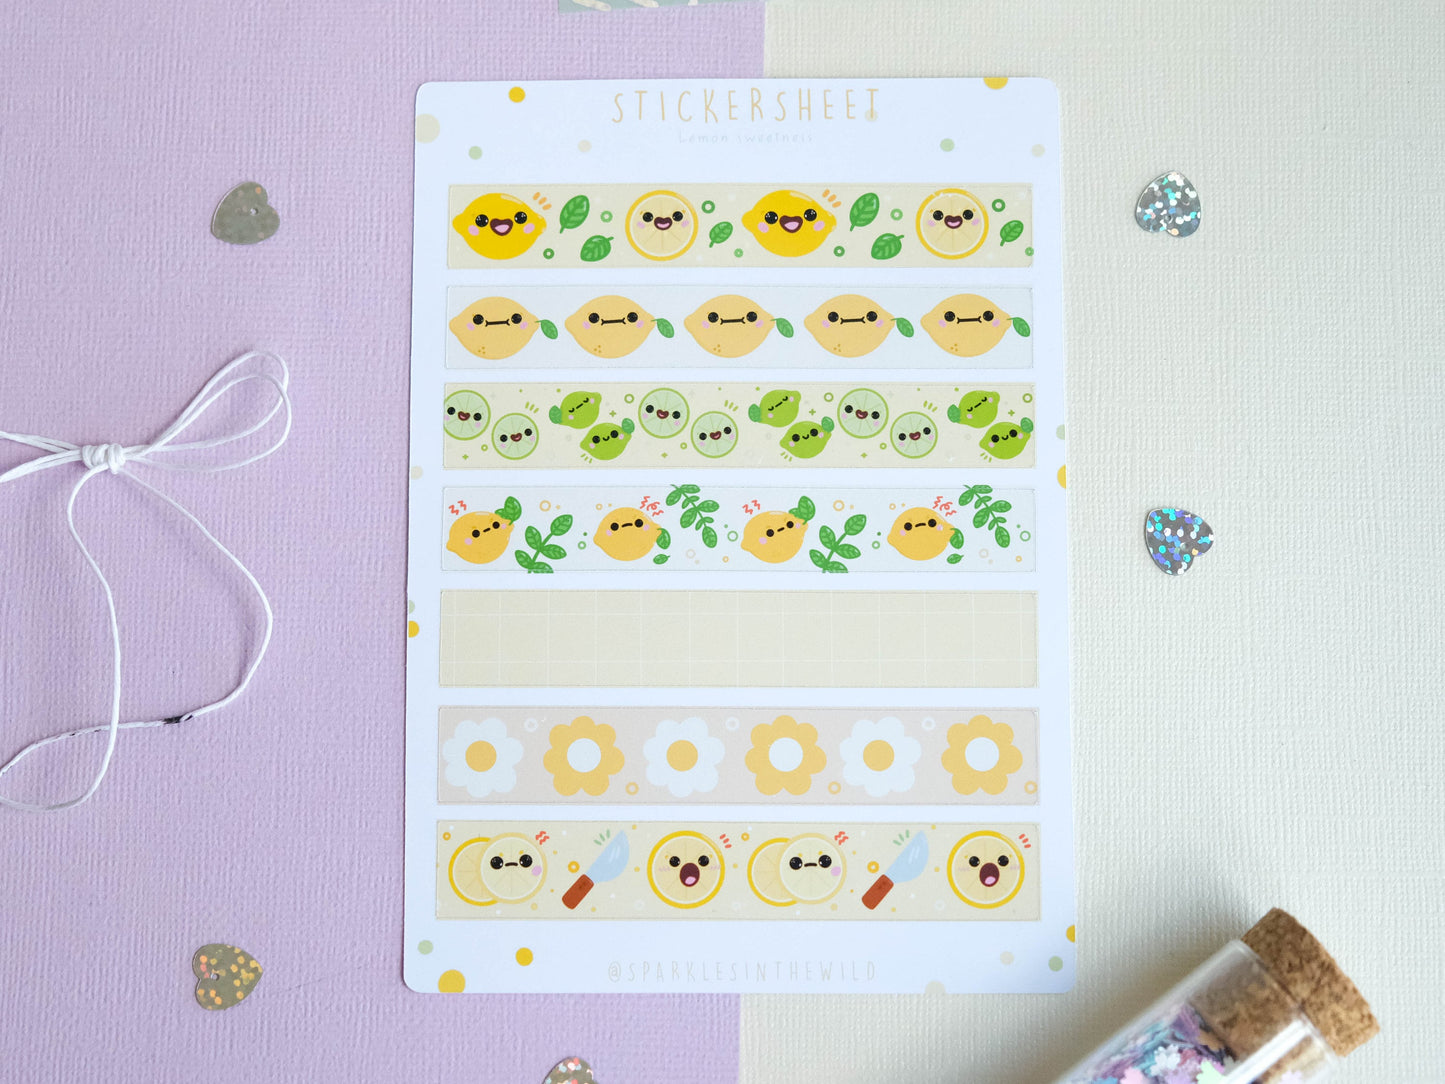 Stickersheet water resistant Lemon and Lime Kawaii to decorate bullet journal and planner